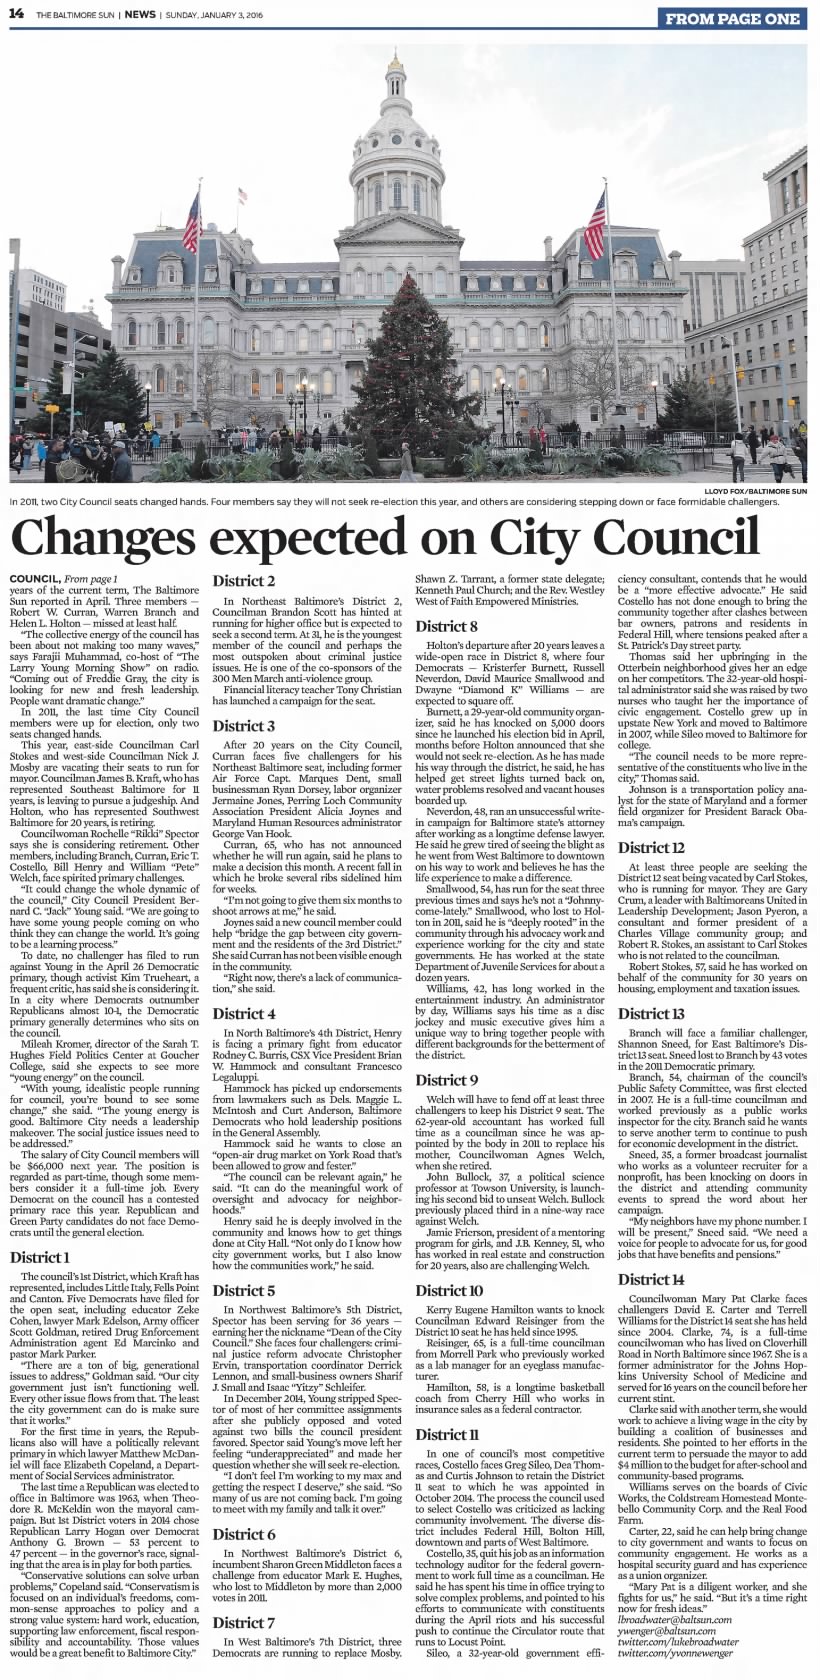 Changes expected on City Council